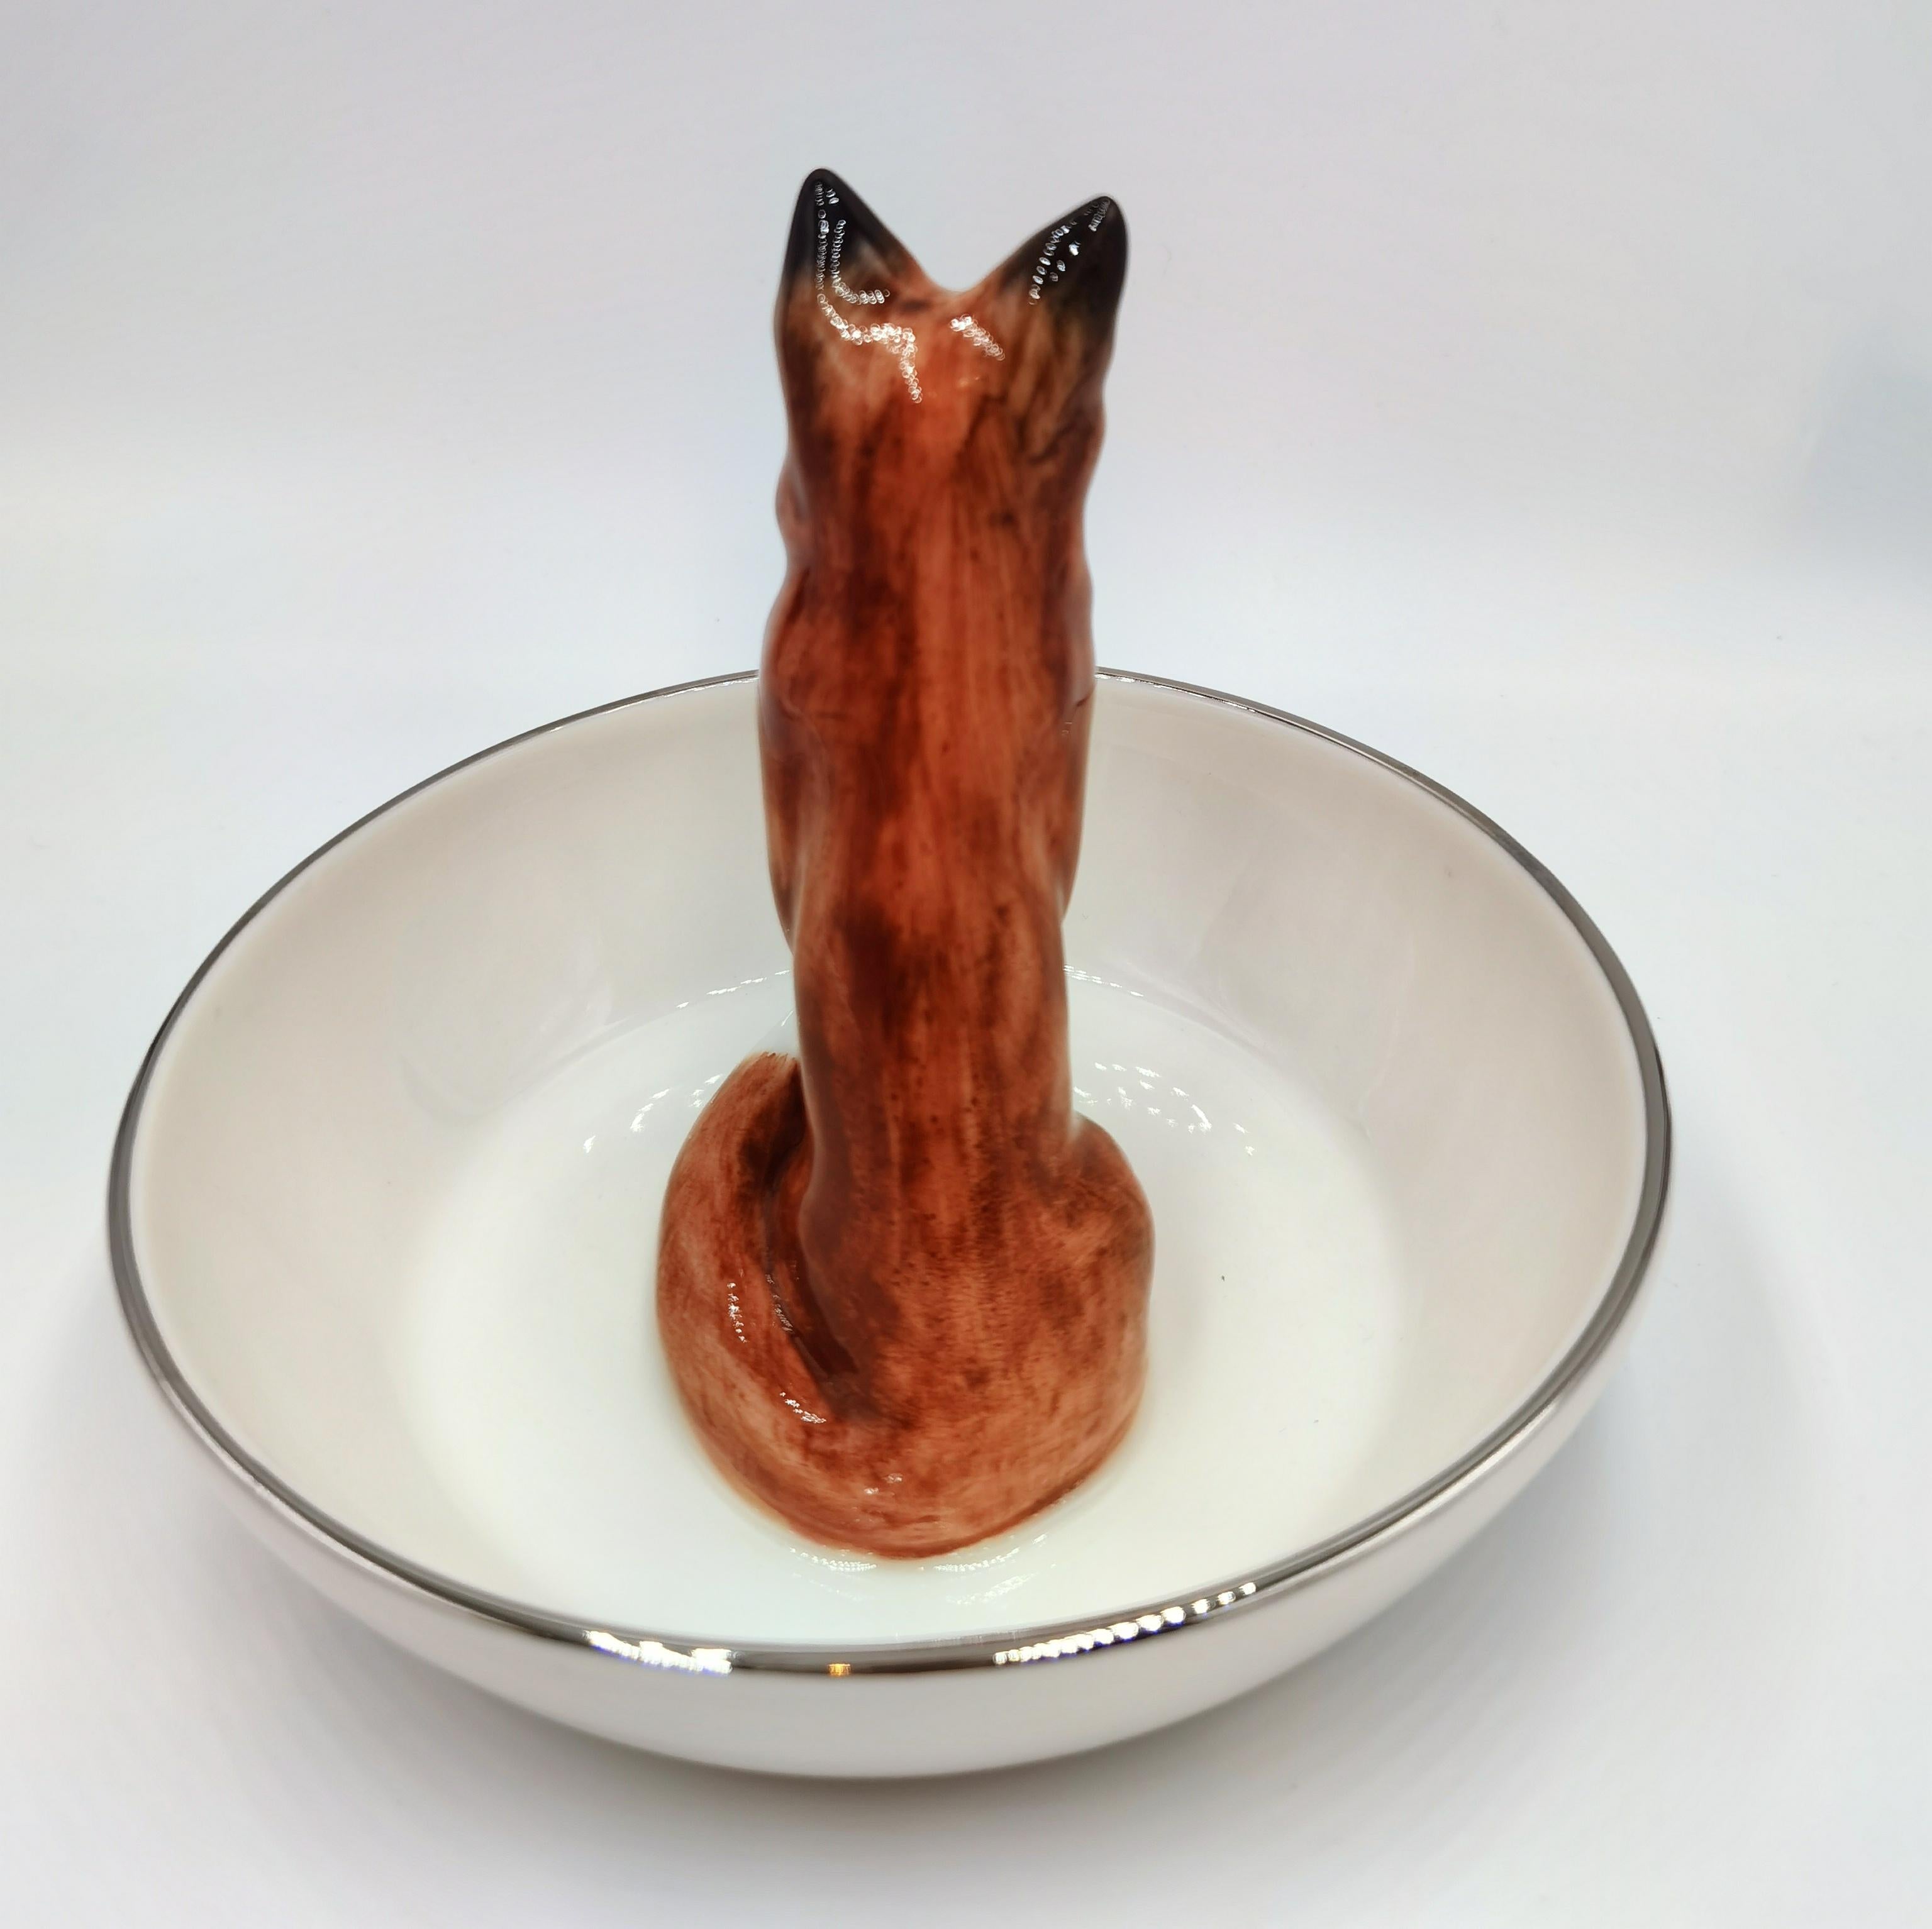 Completely handmade porcelain bowl with a hands-free natrualistic painted fox figure in brown colors. The fox is sitting in the middle of the bowl for decorating nuts or sweets around for a grerat black forest interior style. Rimmed with a fine